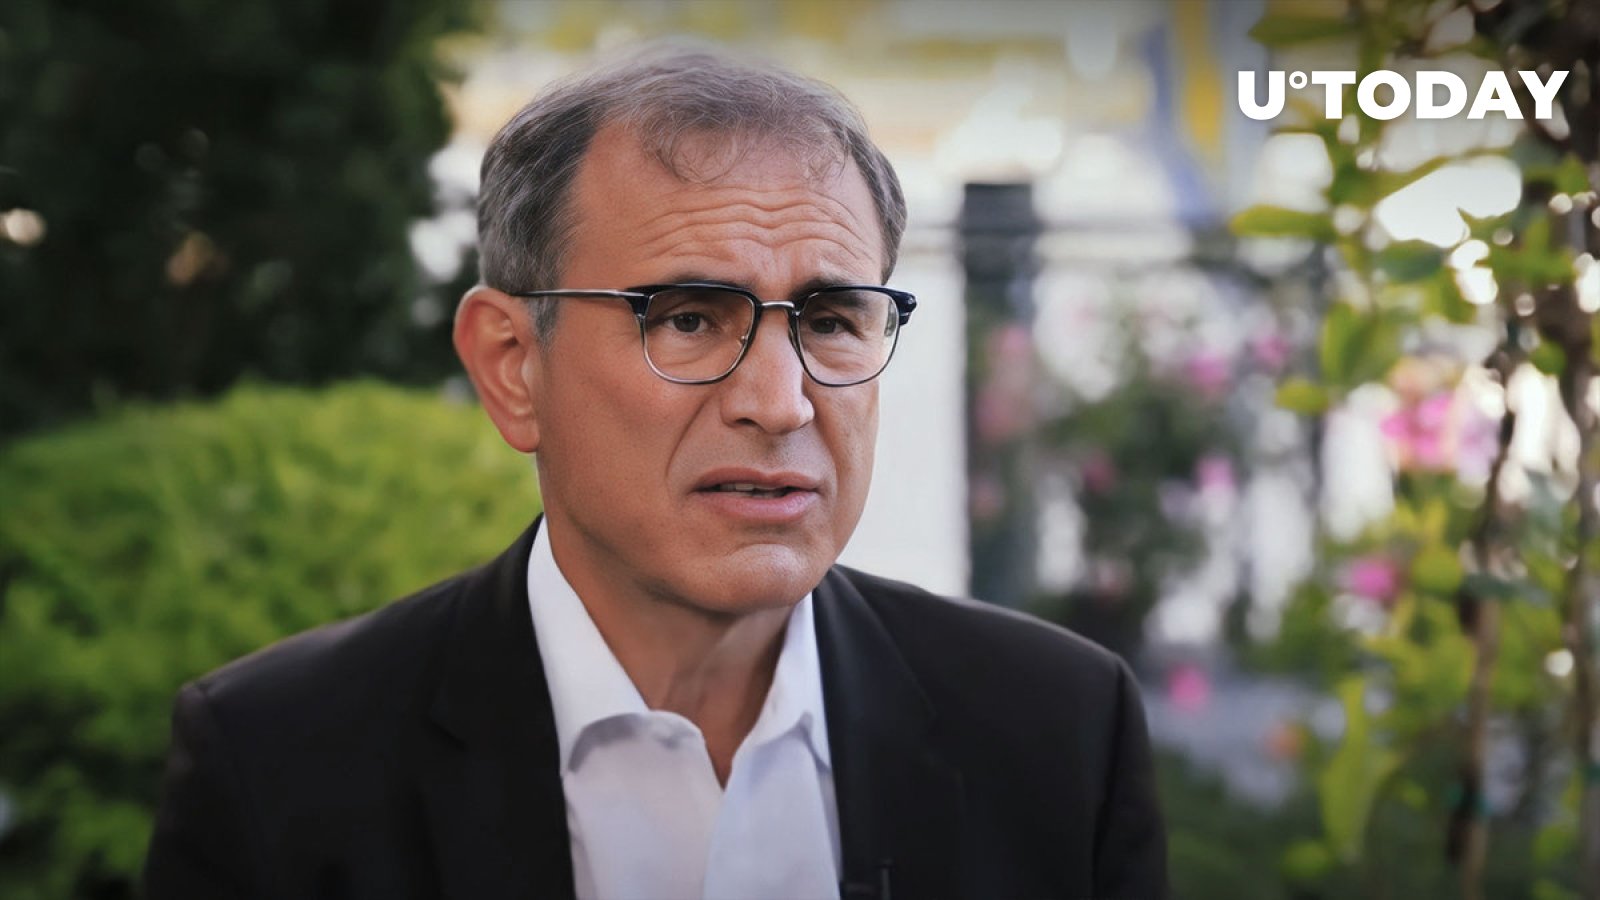 Crypto Hater Roubini Says He Is Not Attacking CZ of Binance, But There’s a Catch